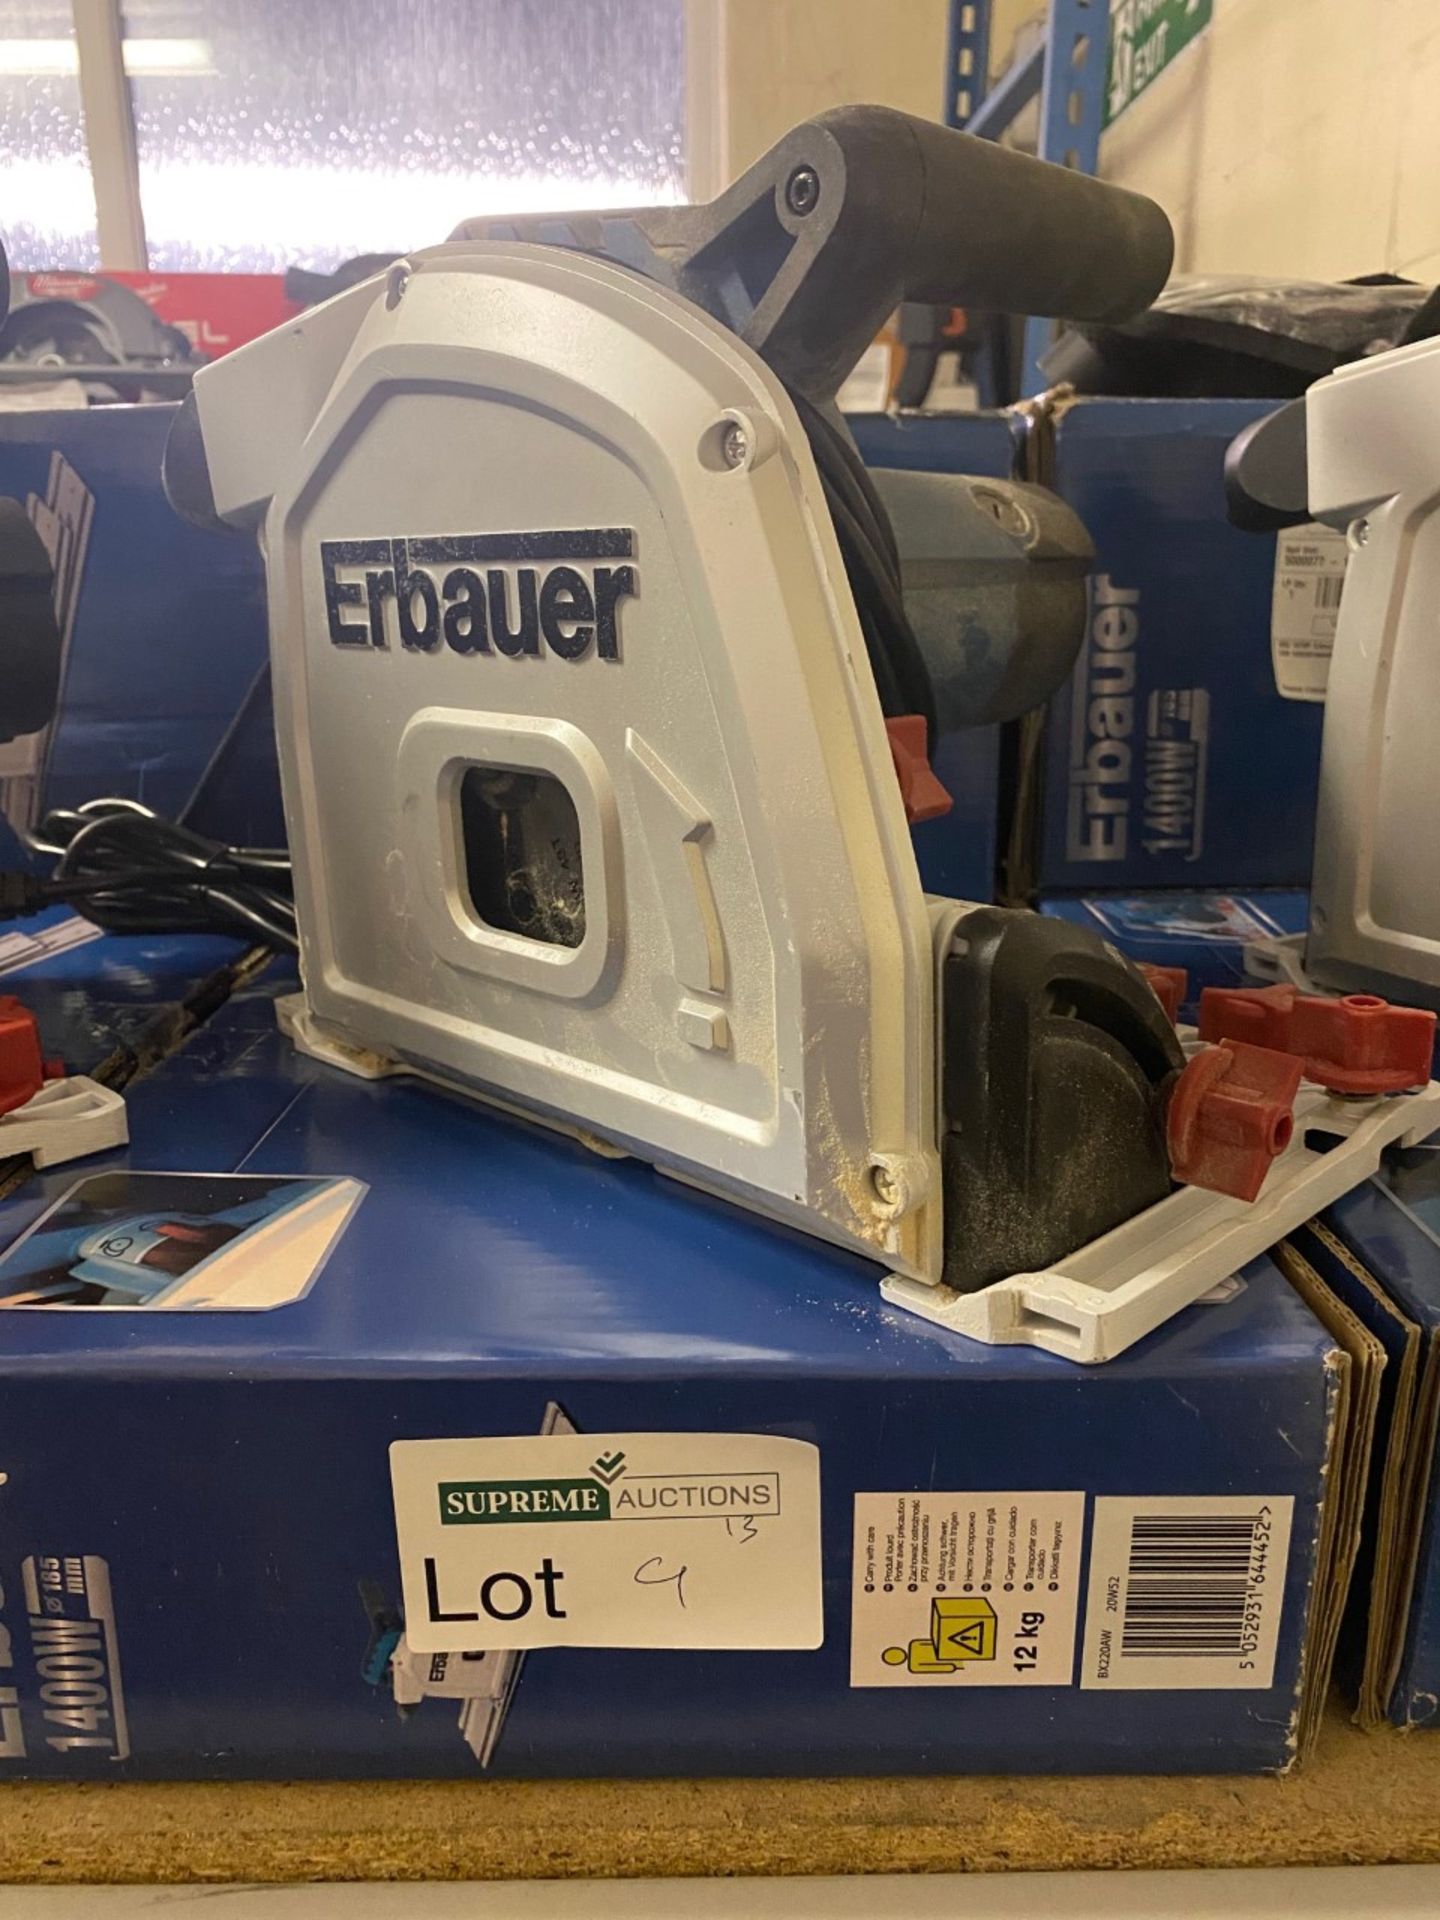 ERBAUER ERB690CSW 185MM ELECTRIC PLUNGE SAW 240V COMES WITH BOX (UNCHECKED) (9/13)